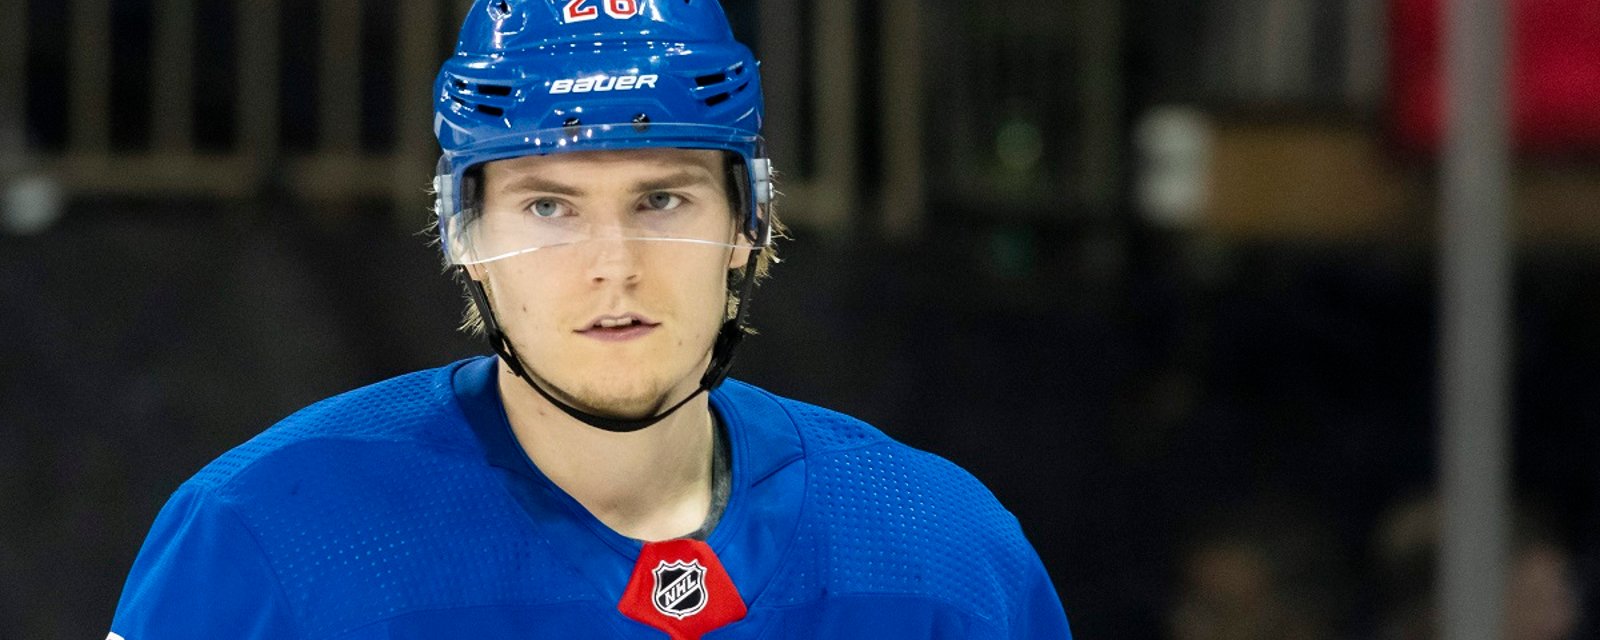 Lias Andersson has left the Rangers and is demanding a trade.